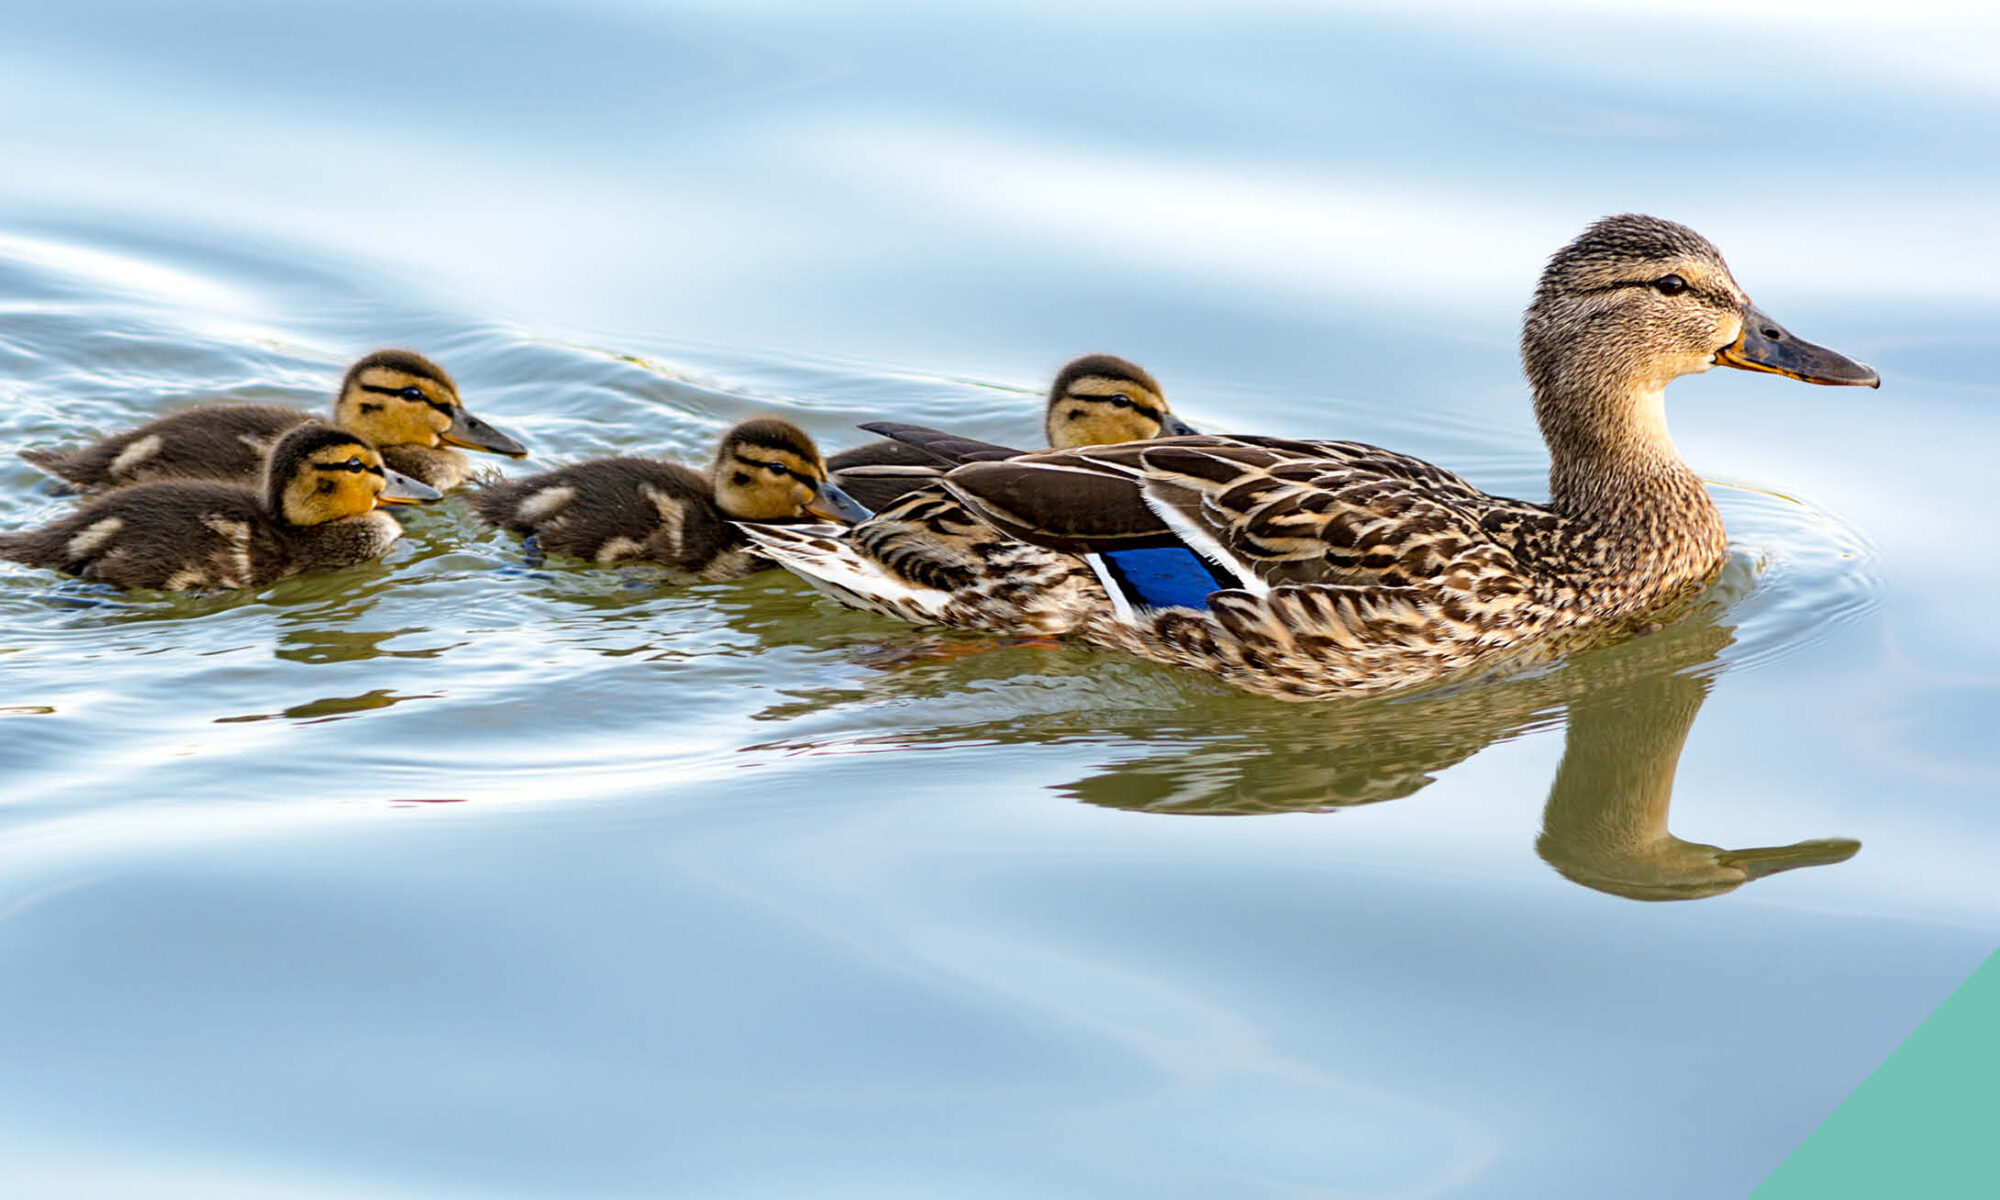 ducklings swimming with mother duck